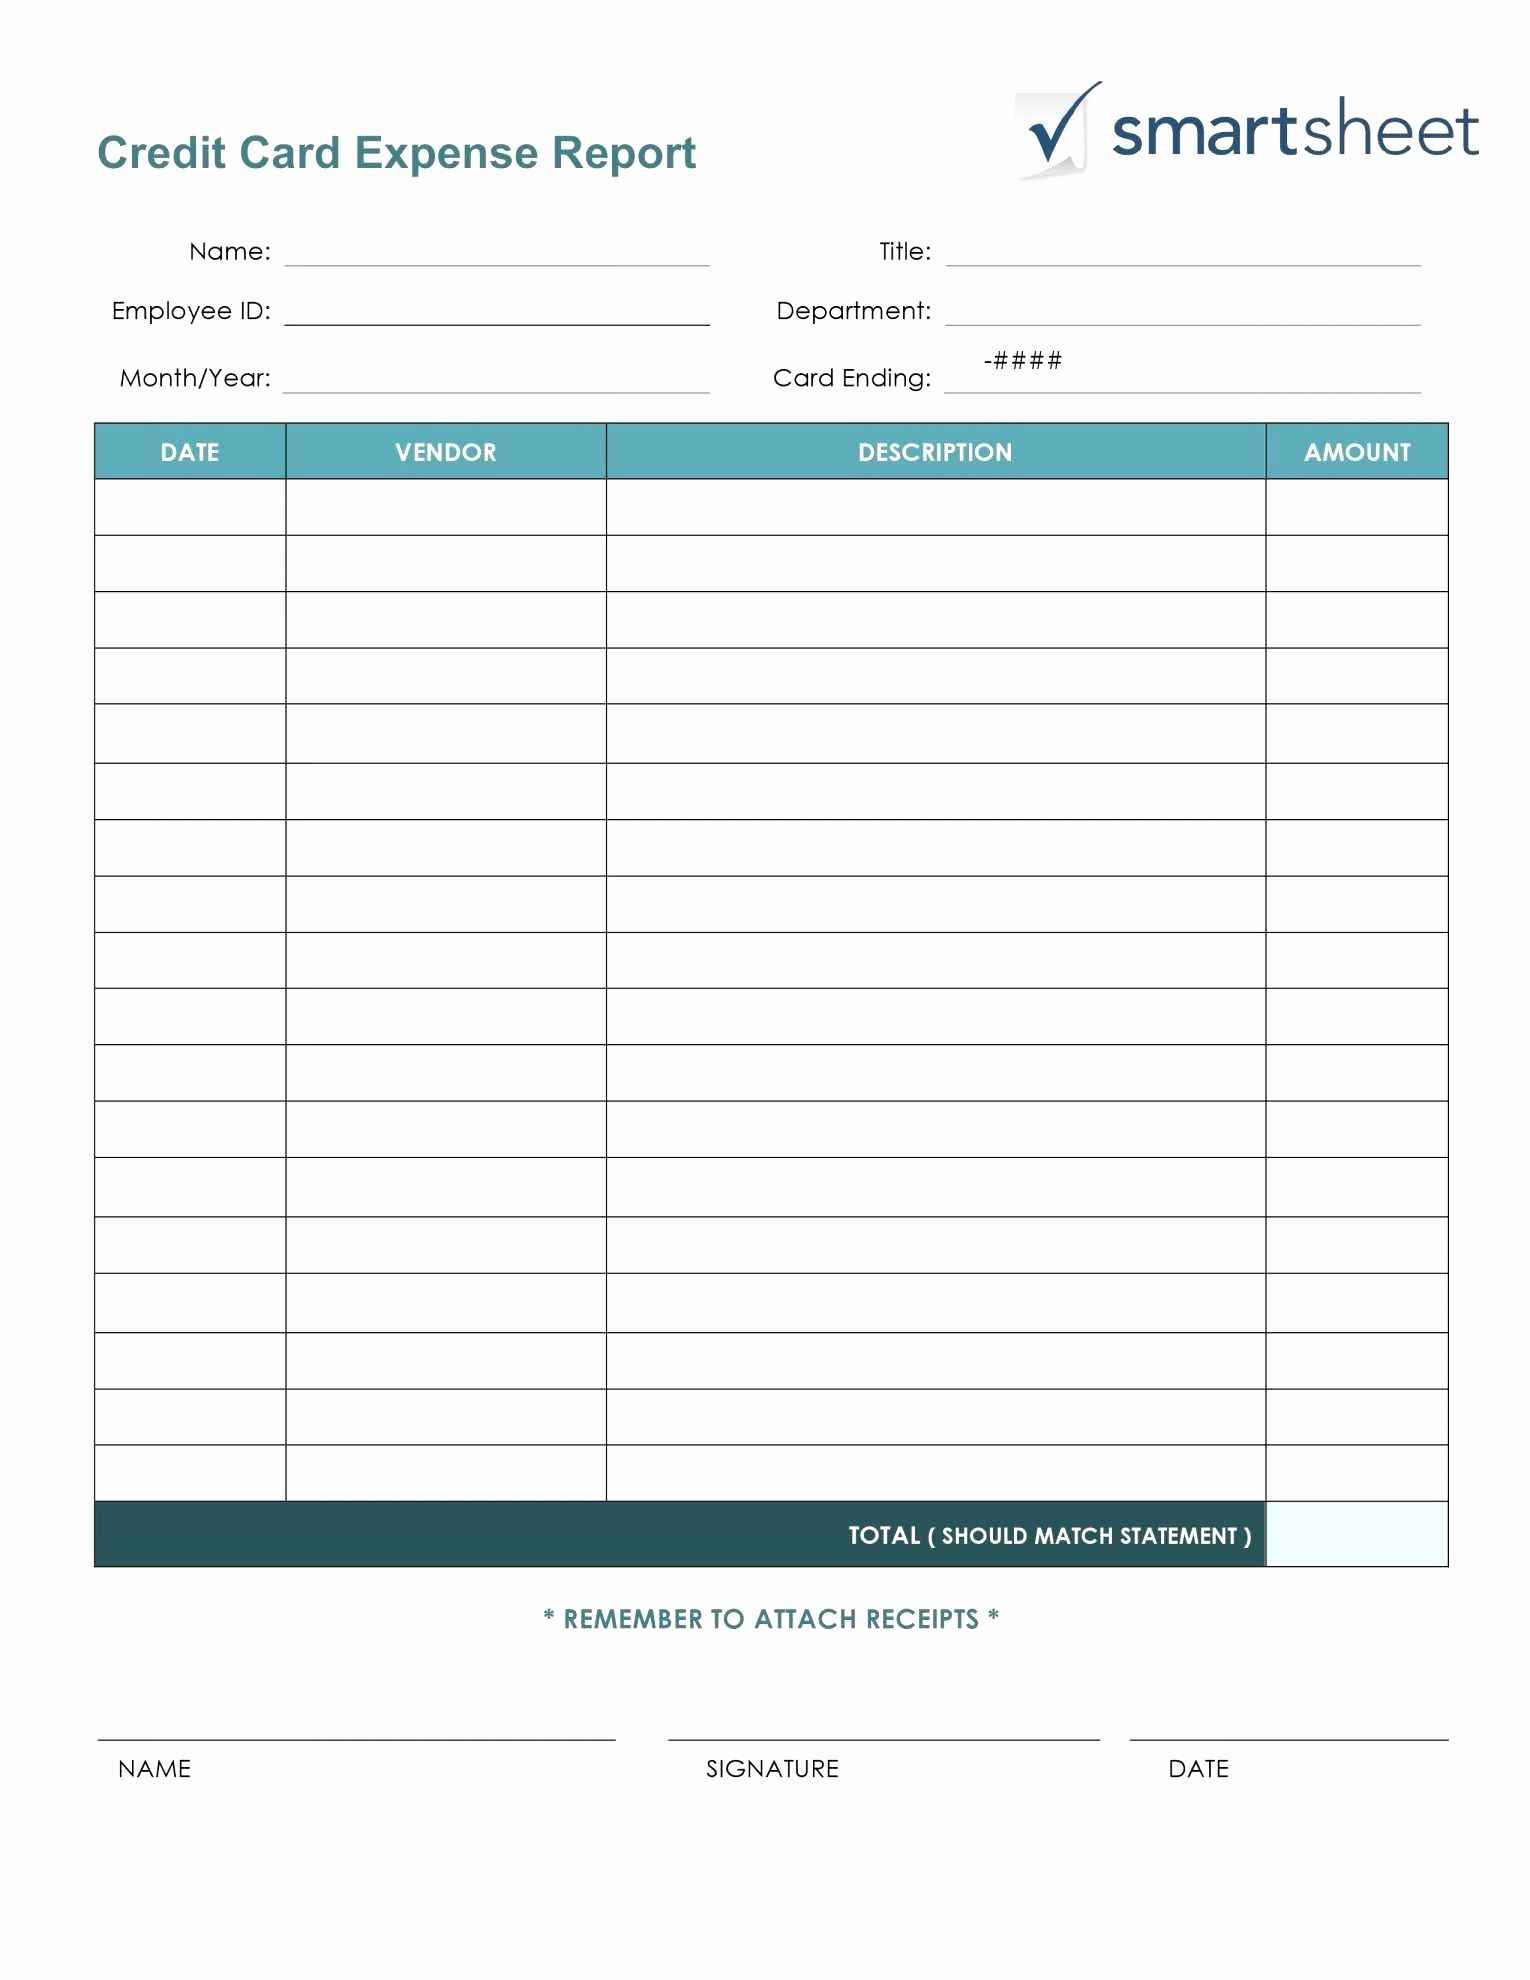 Workout Tracker Spreadsheet pertaining to Training Tracker Excel Template Safety Employee 2010 Spreadsheet